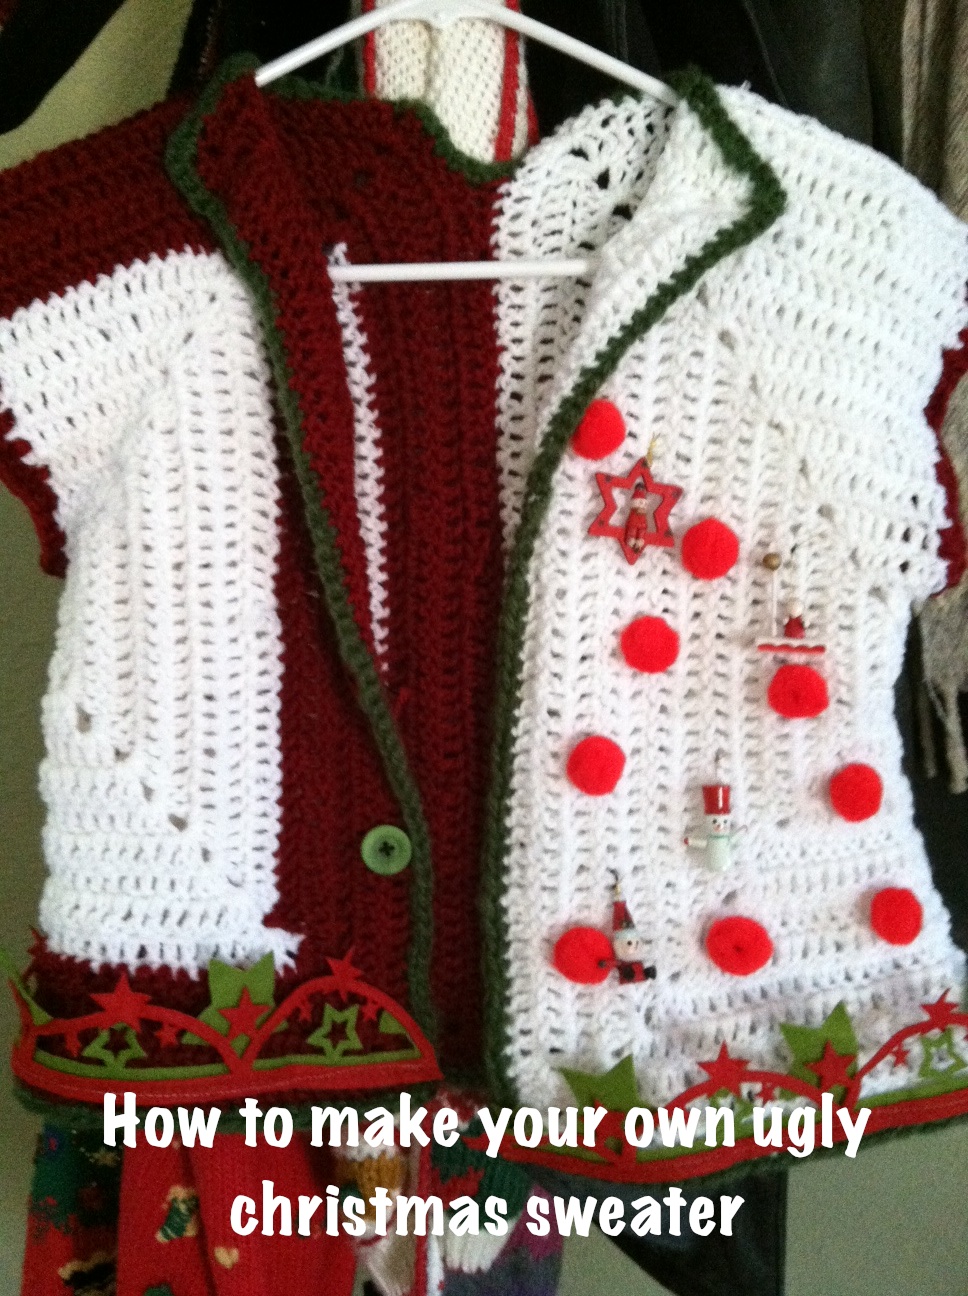 How to make the sweater